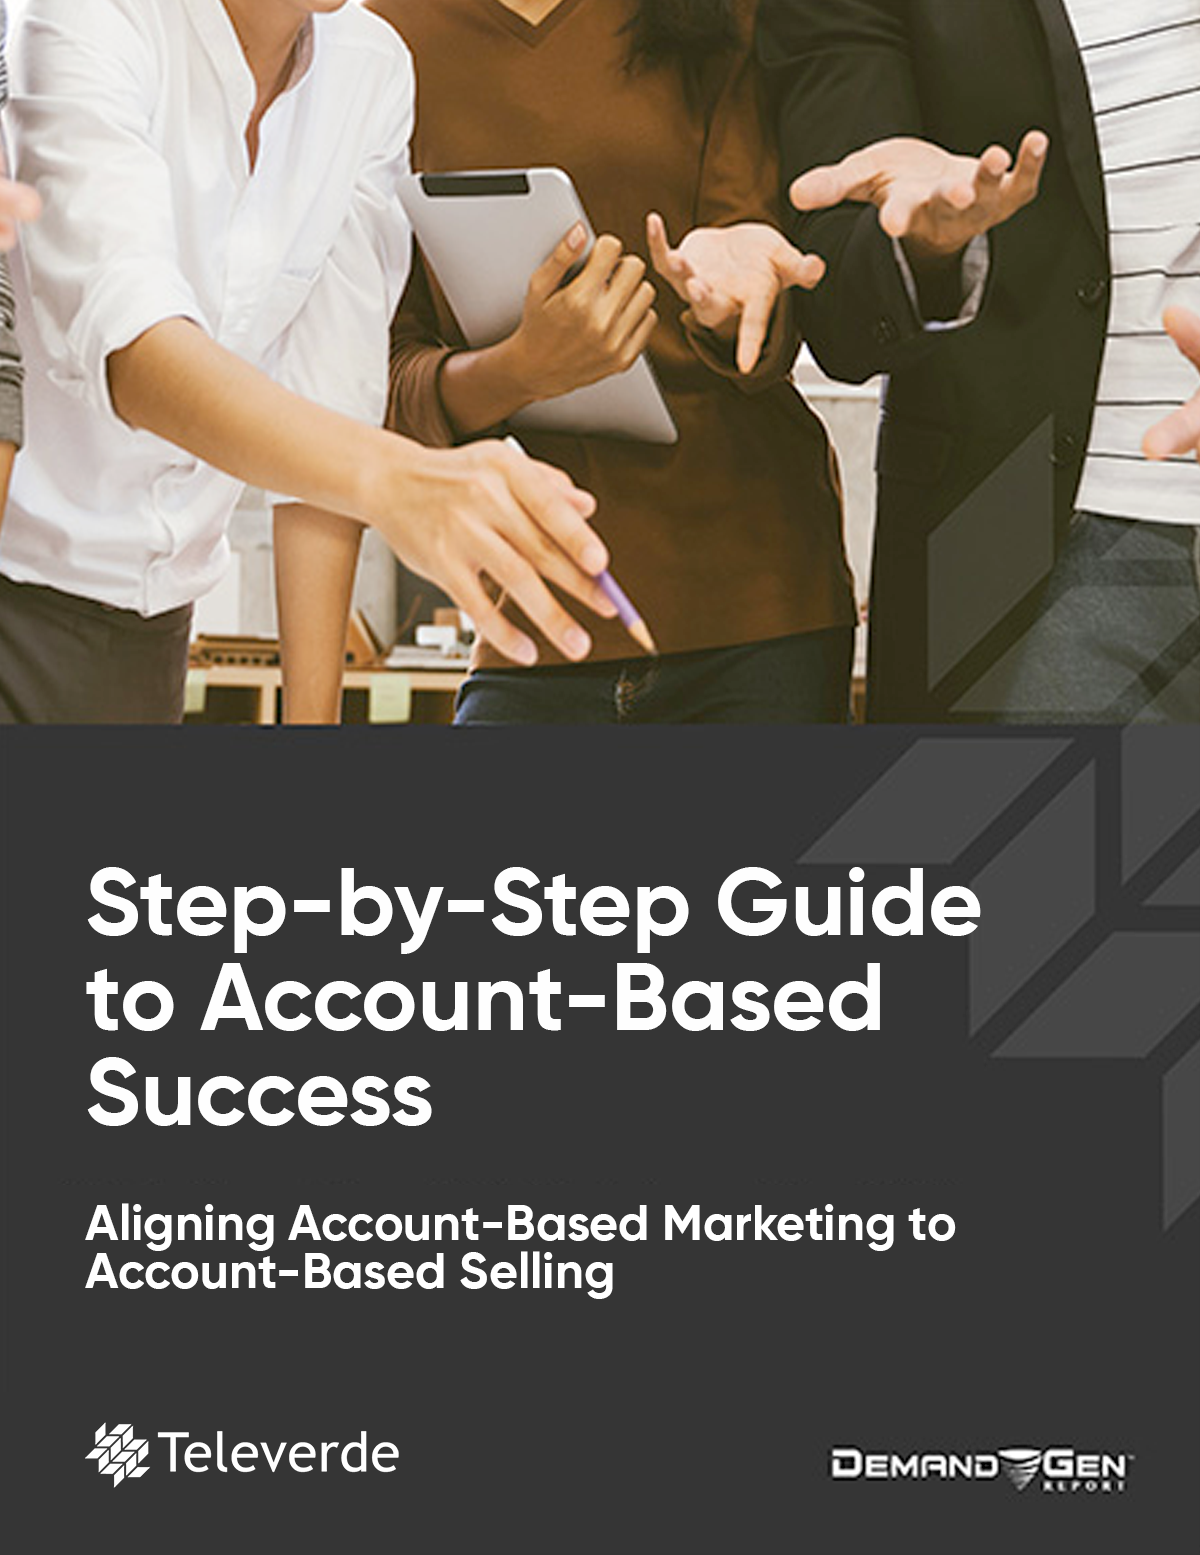 Step-by-Step Guide to Account-Based Success